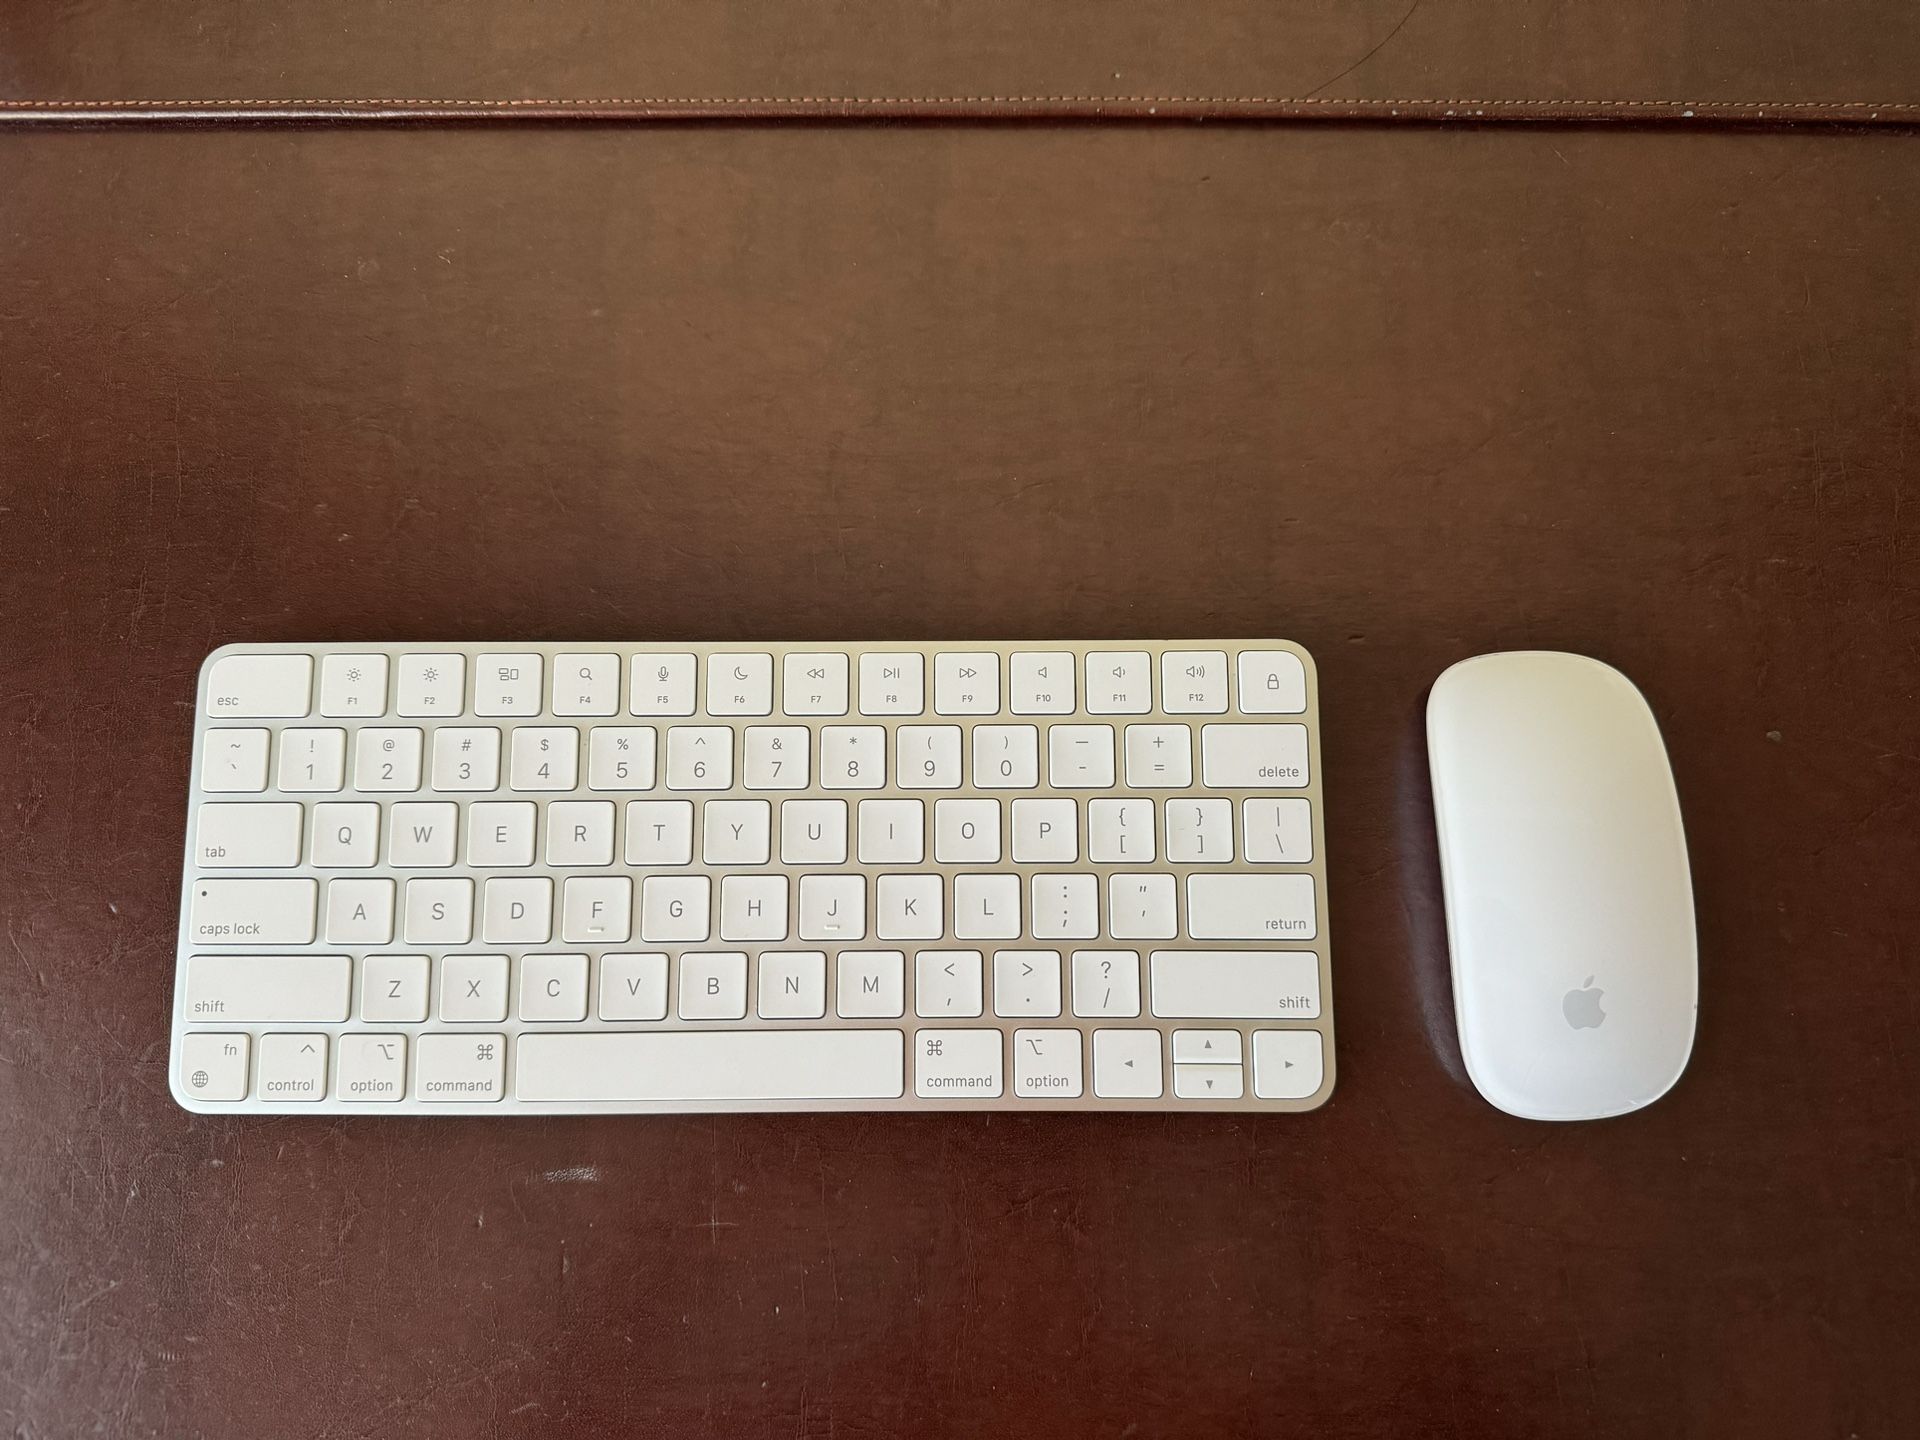 Apple Magic Keyboard And Mouse, Both Are Gen 2 Version.